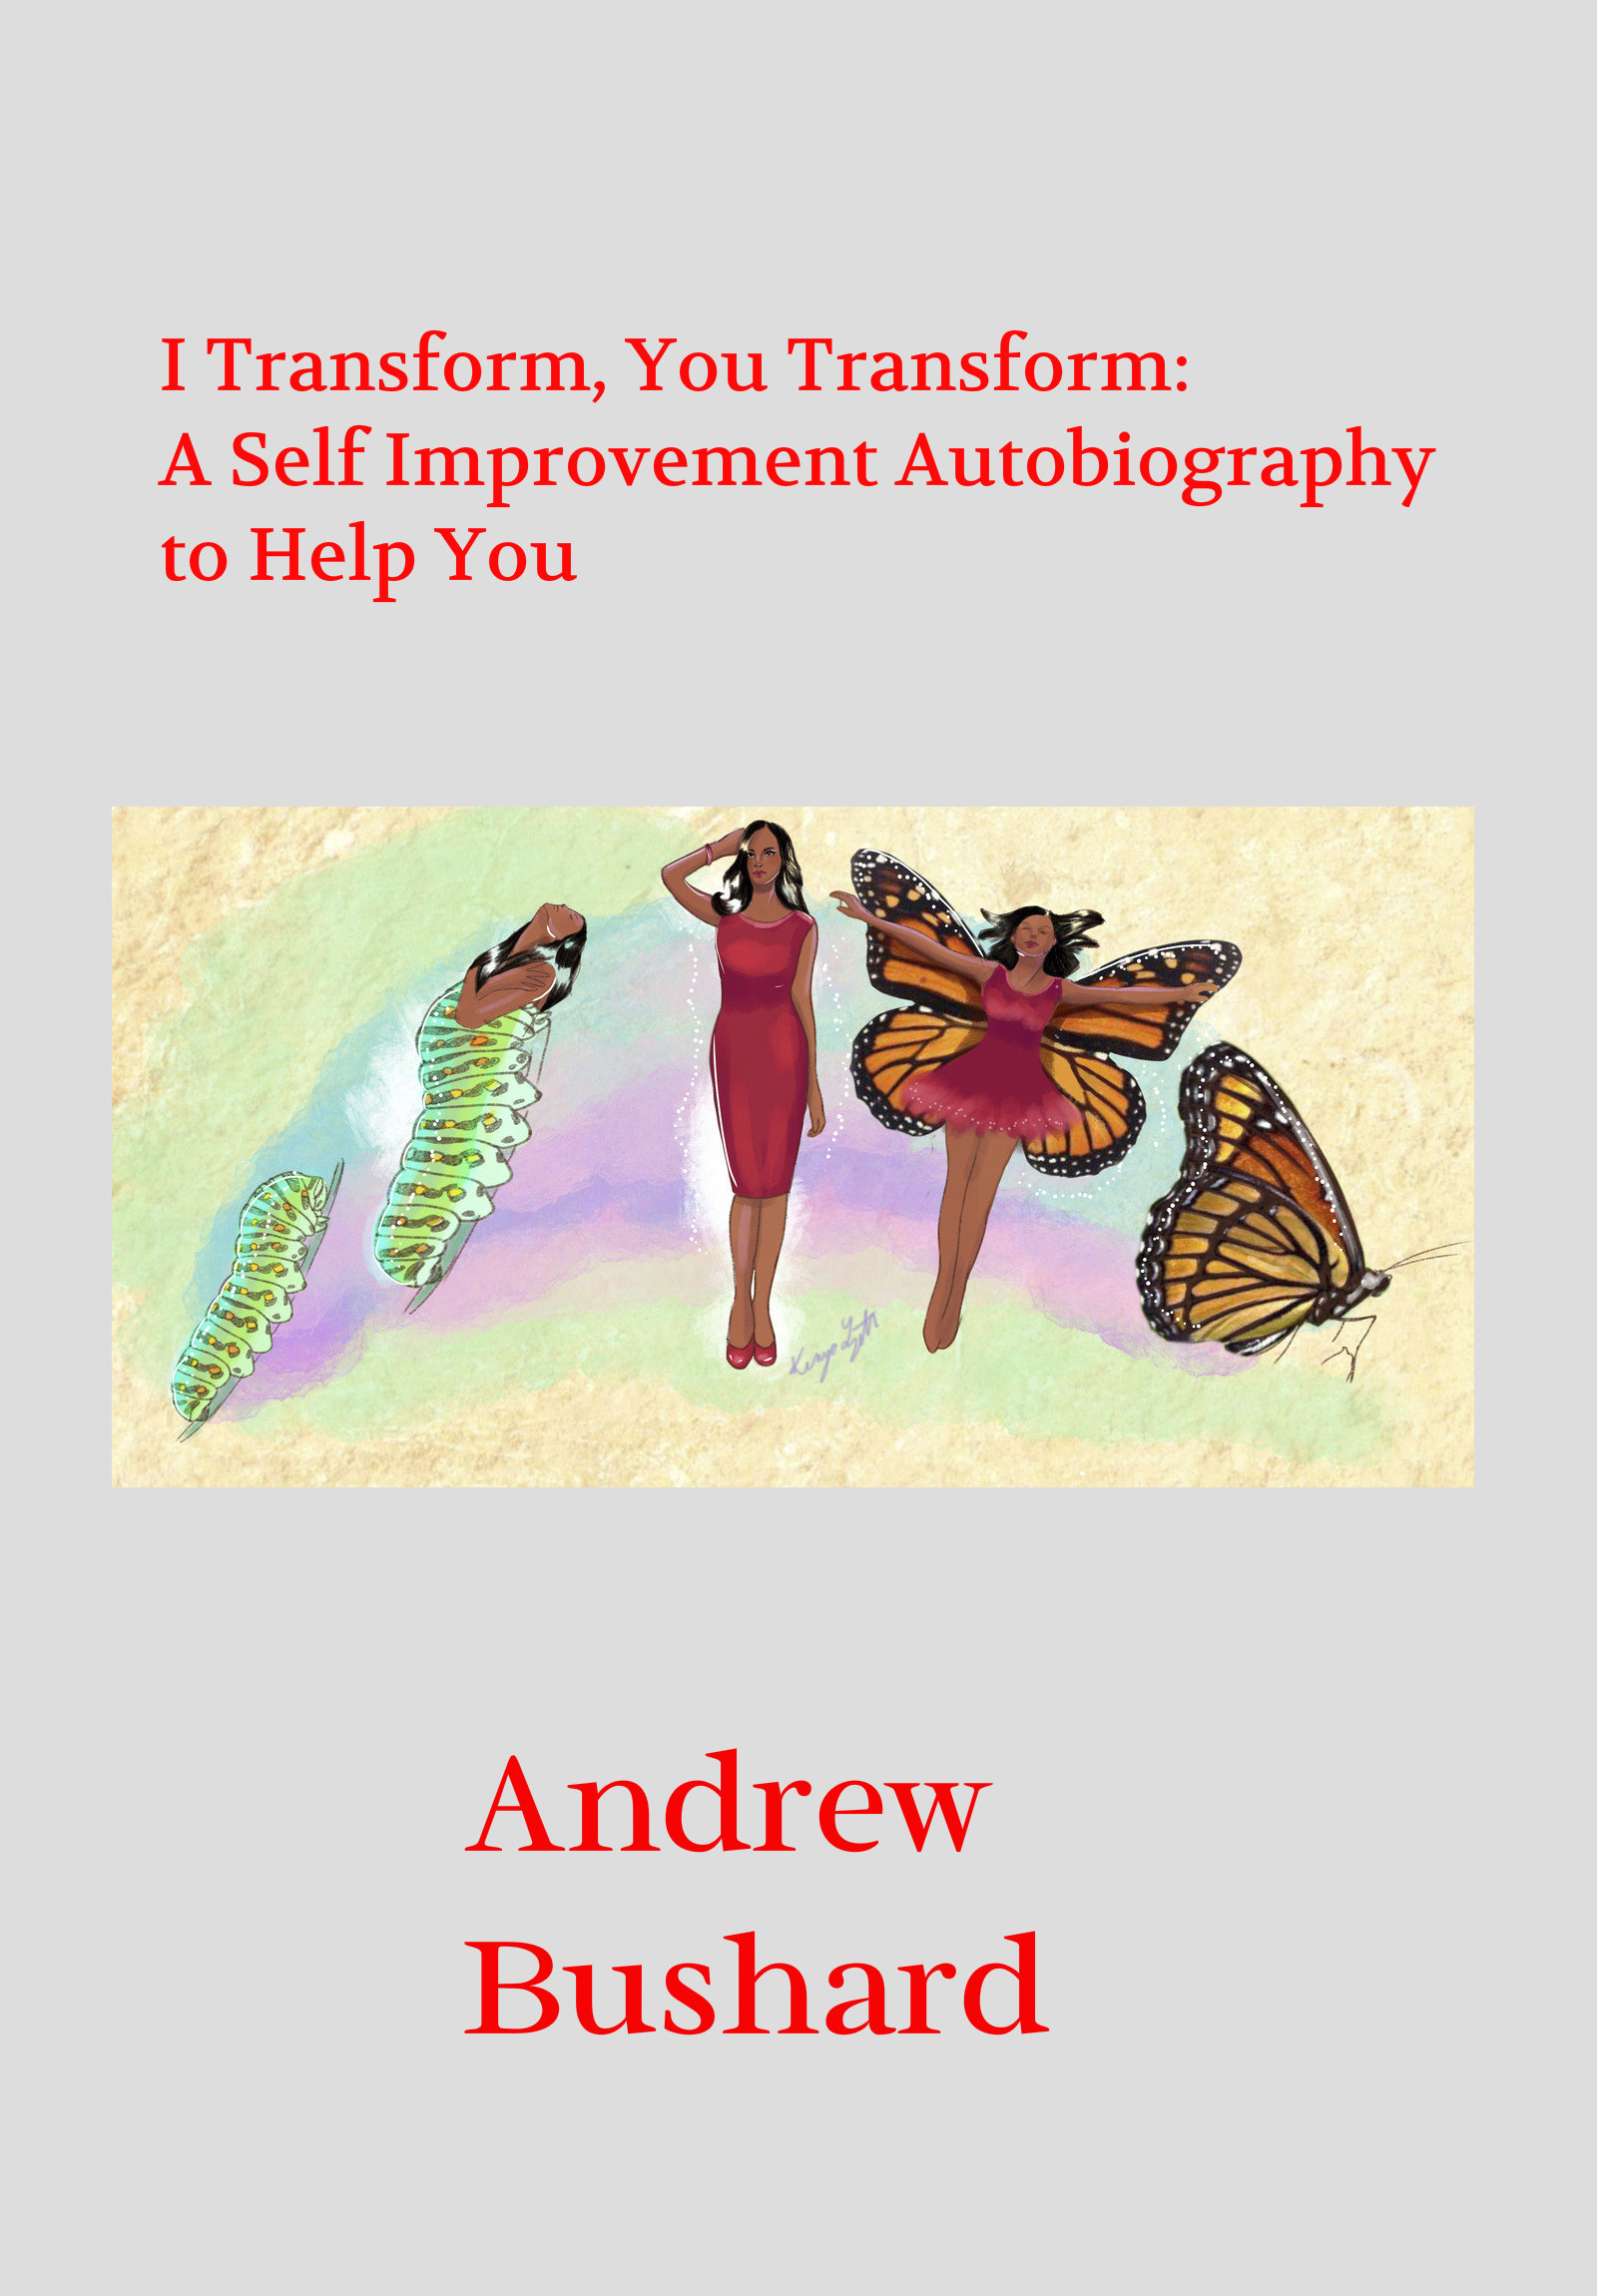 I Transform, You Transform: A Self Improvement Autobiography to Help You's featured image